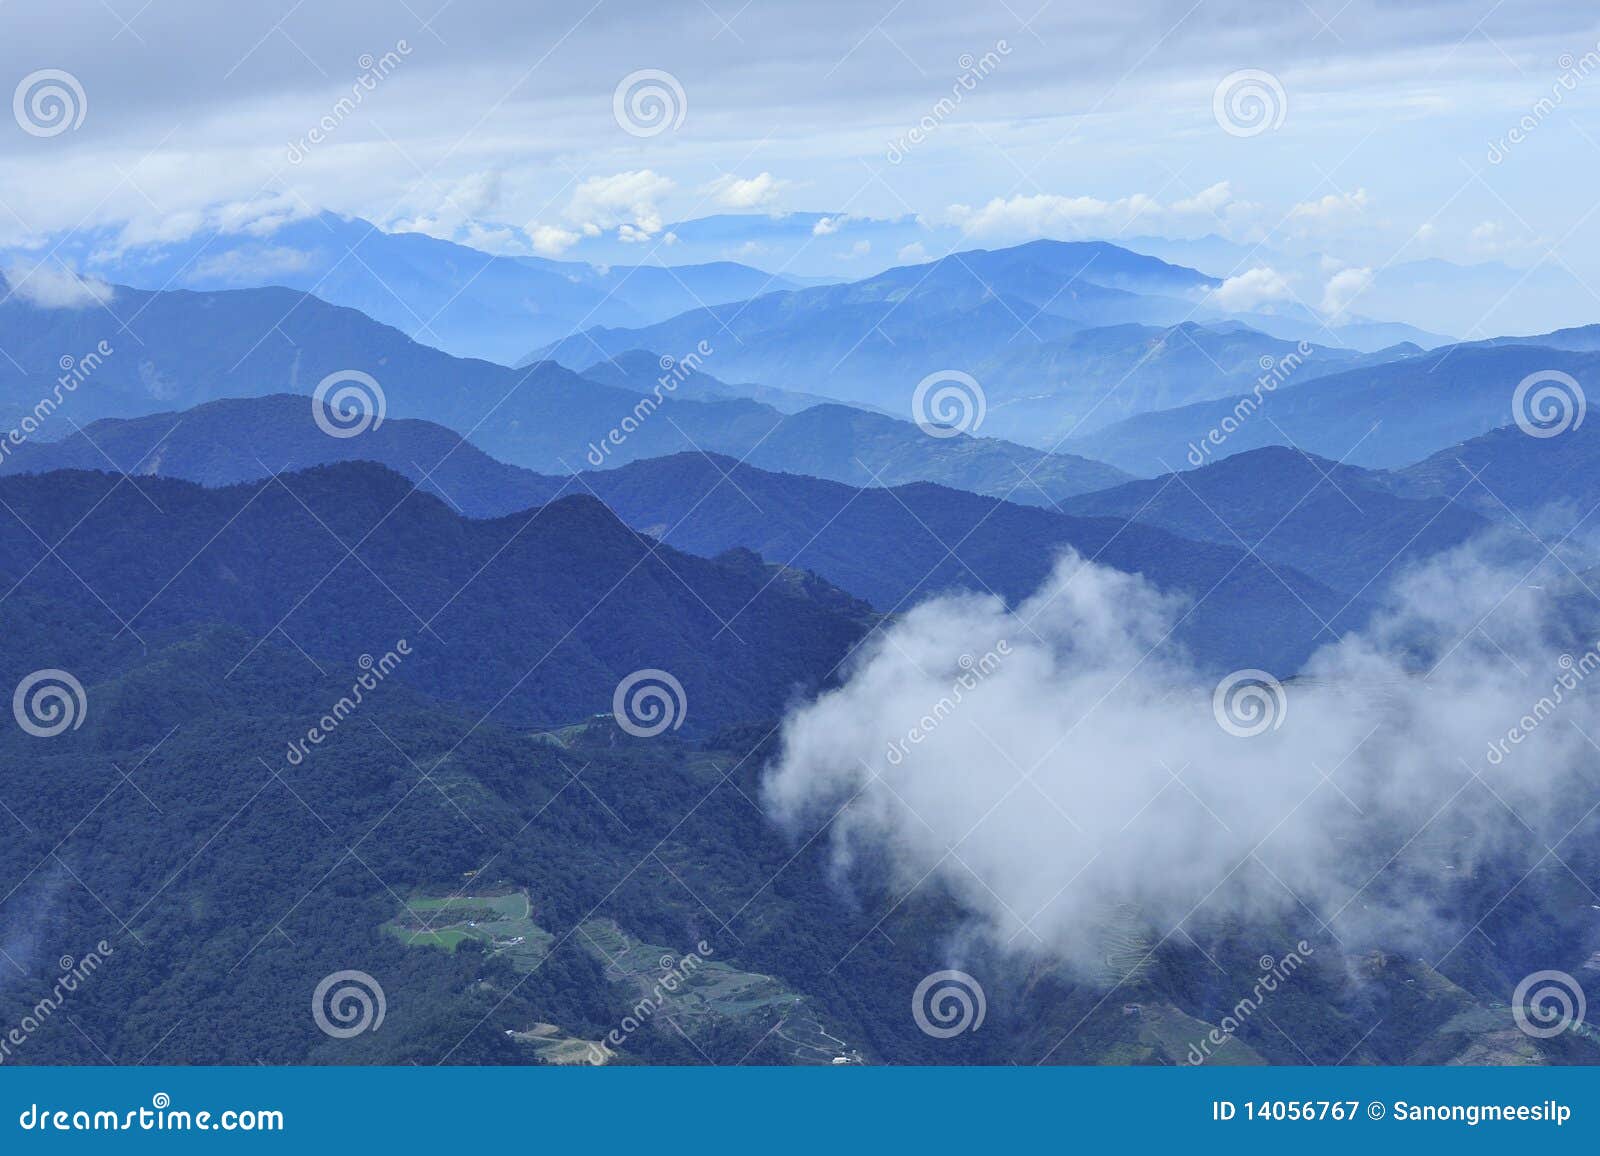 moutain and cloud